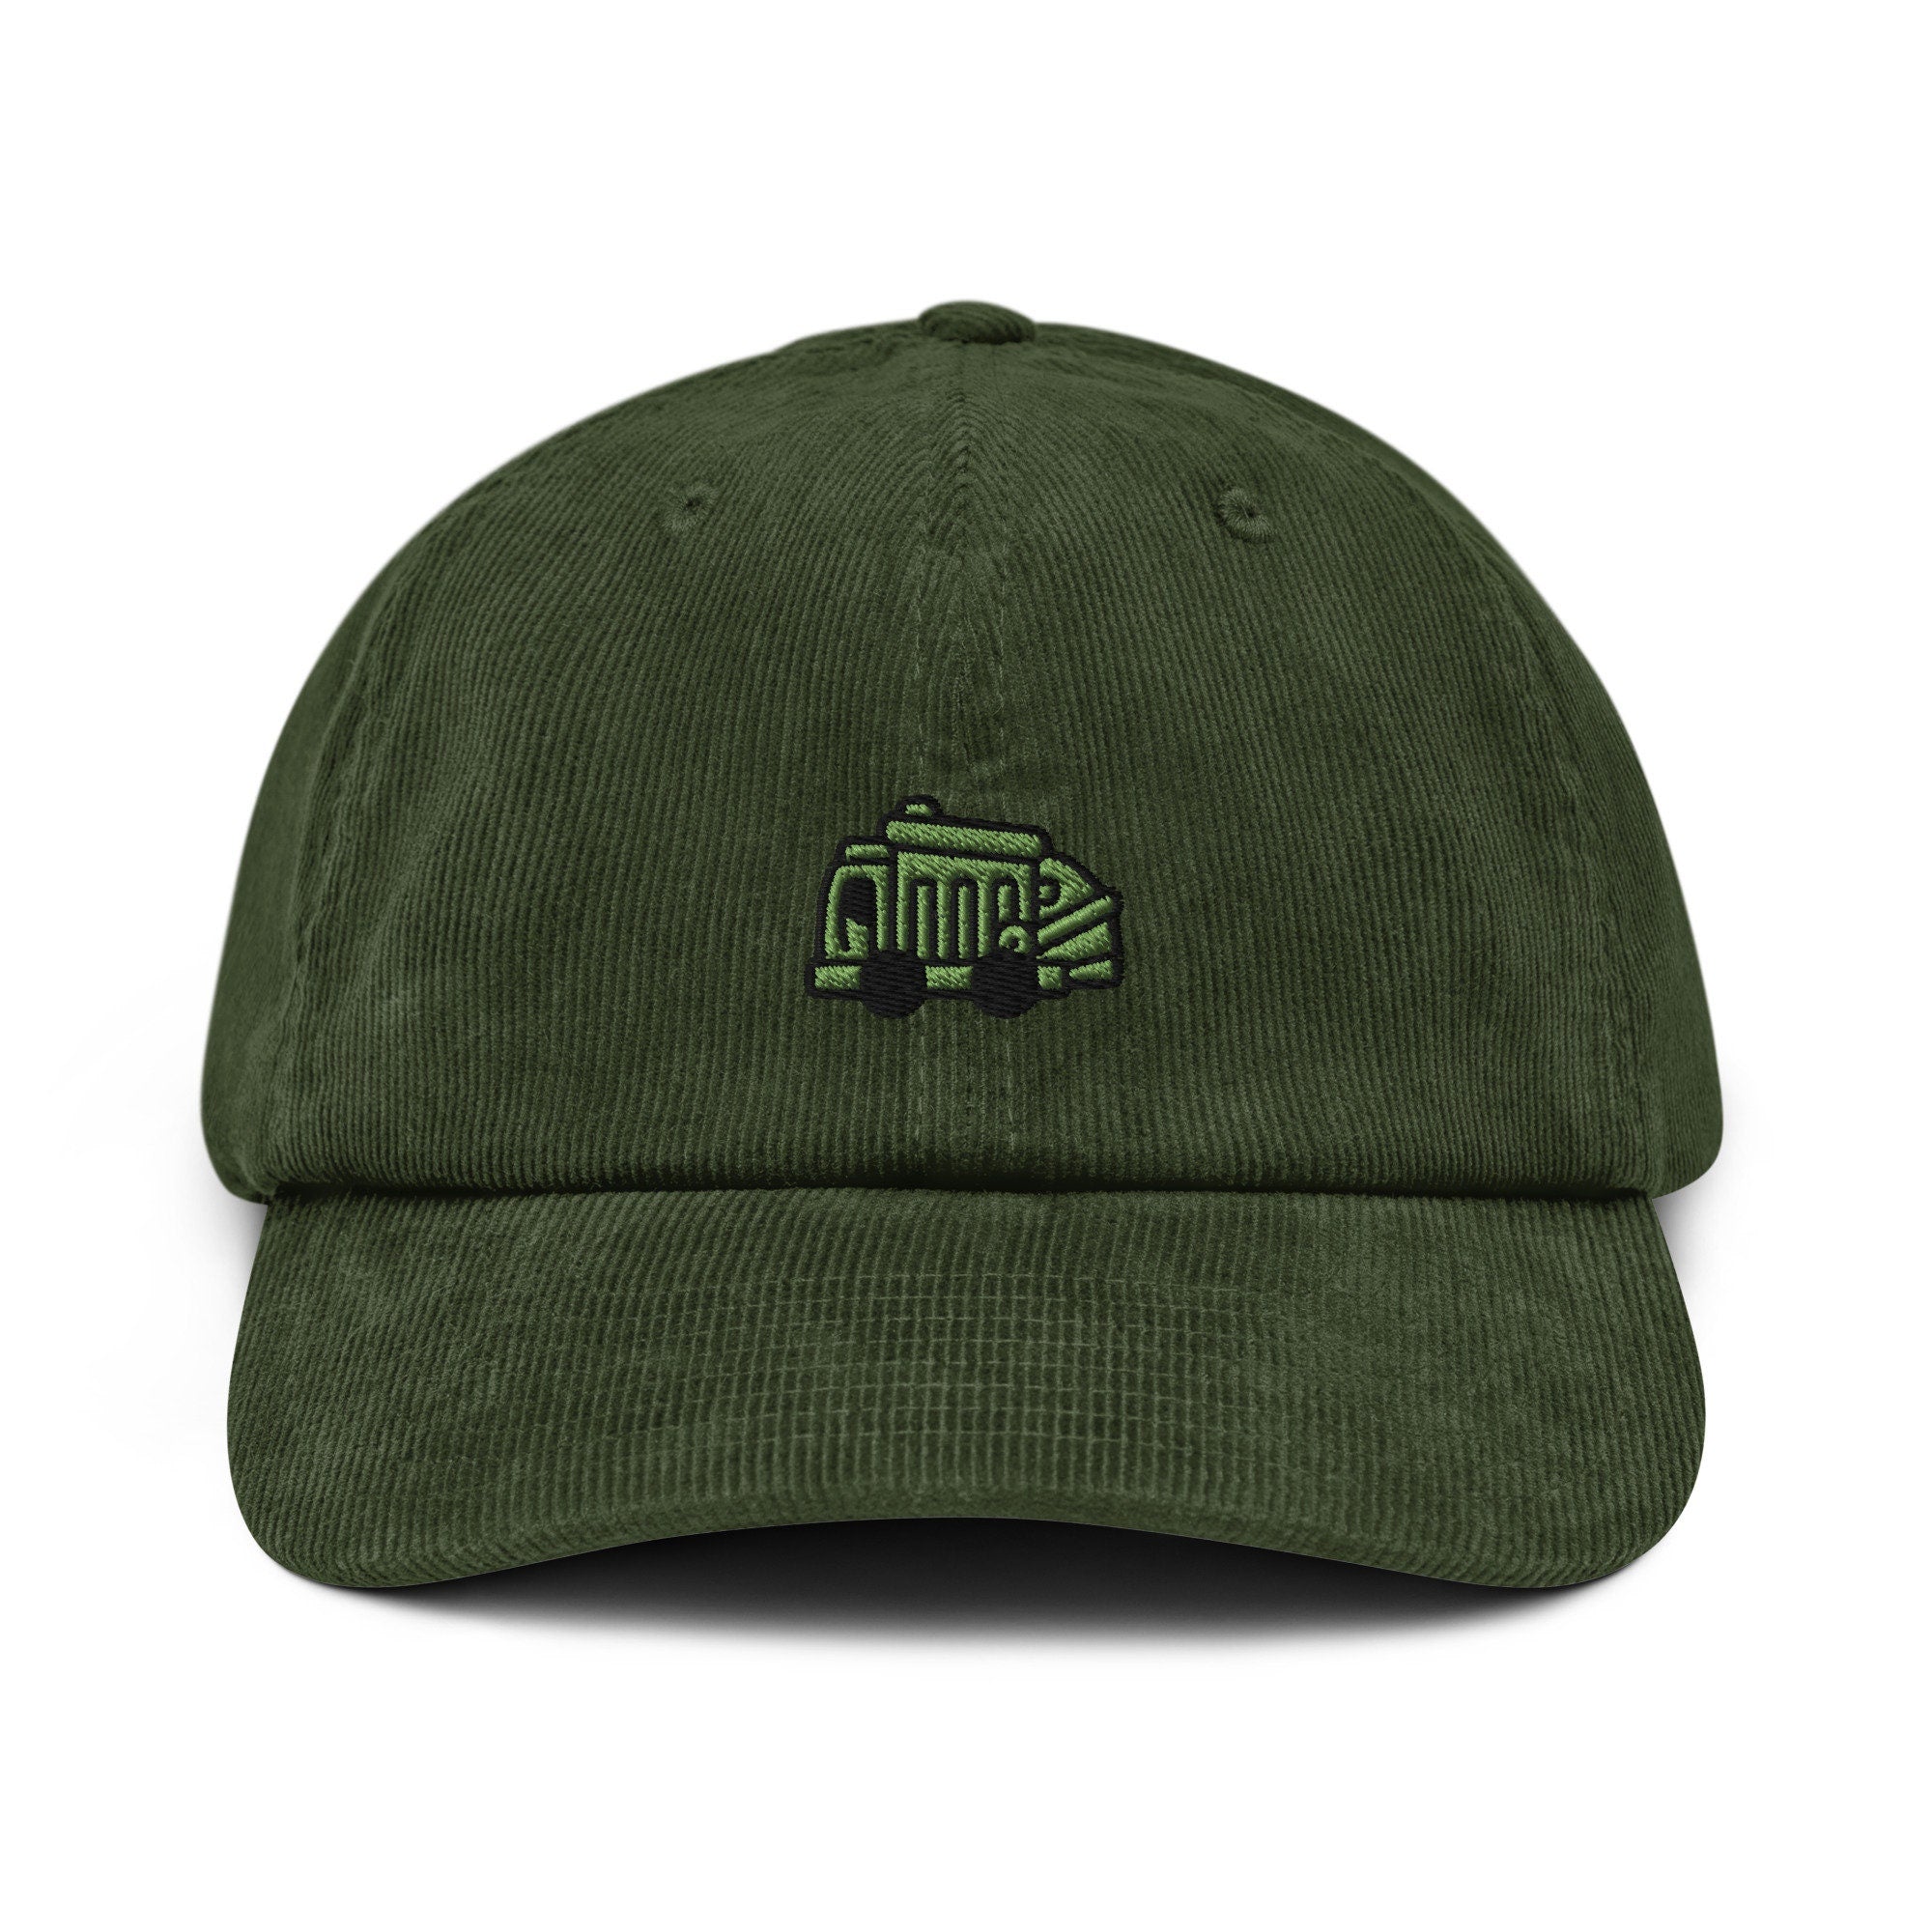 Garbage Truck Corduroy Hat, Handmade Embroidered Corduroy Dad Cap - Multiple Colors